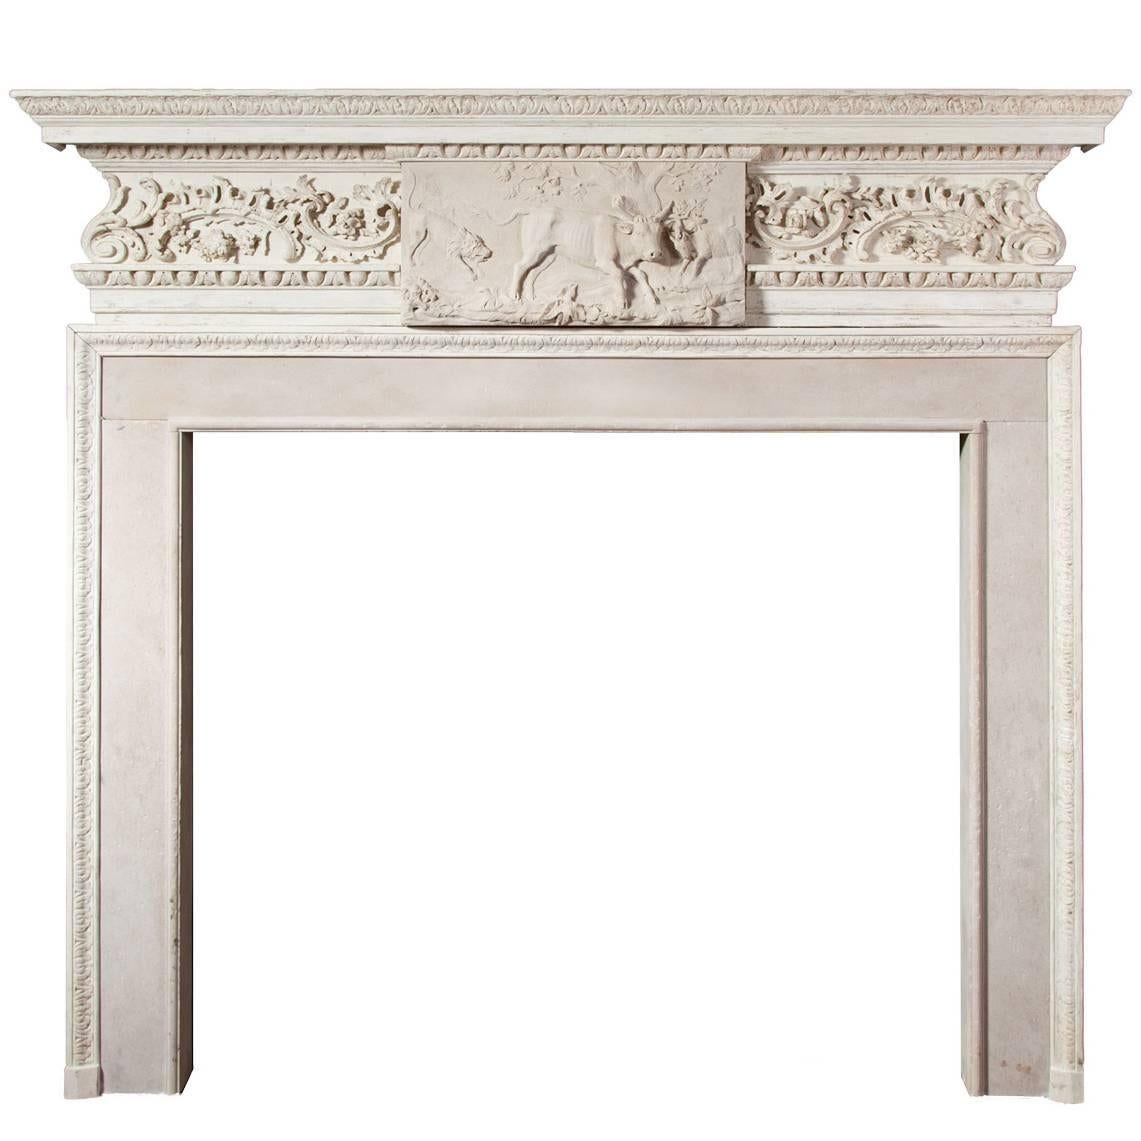 18th Century Sir Henry Cheere Fireplace For Sale